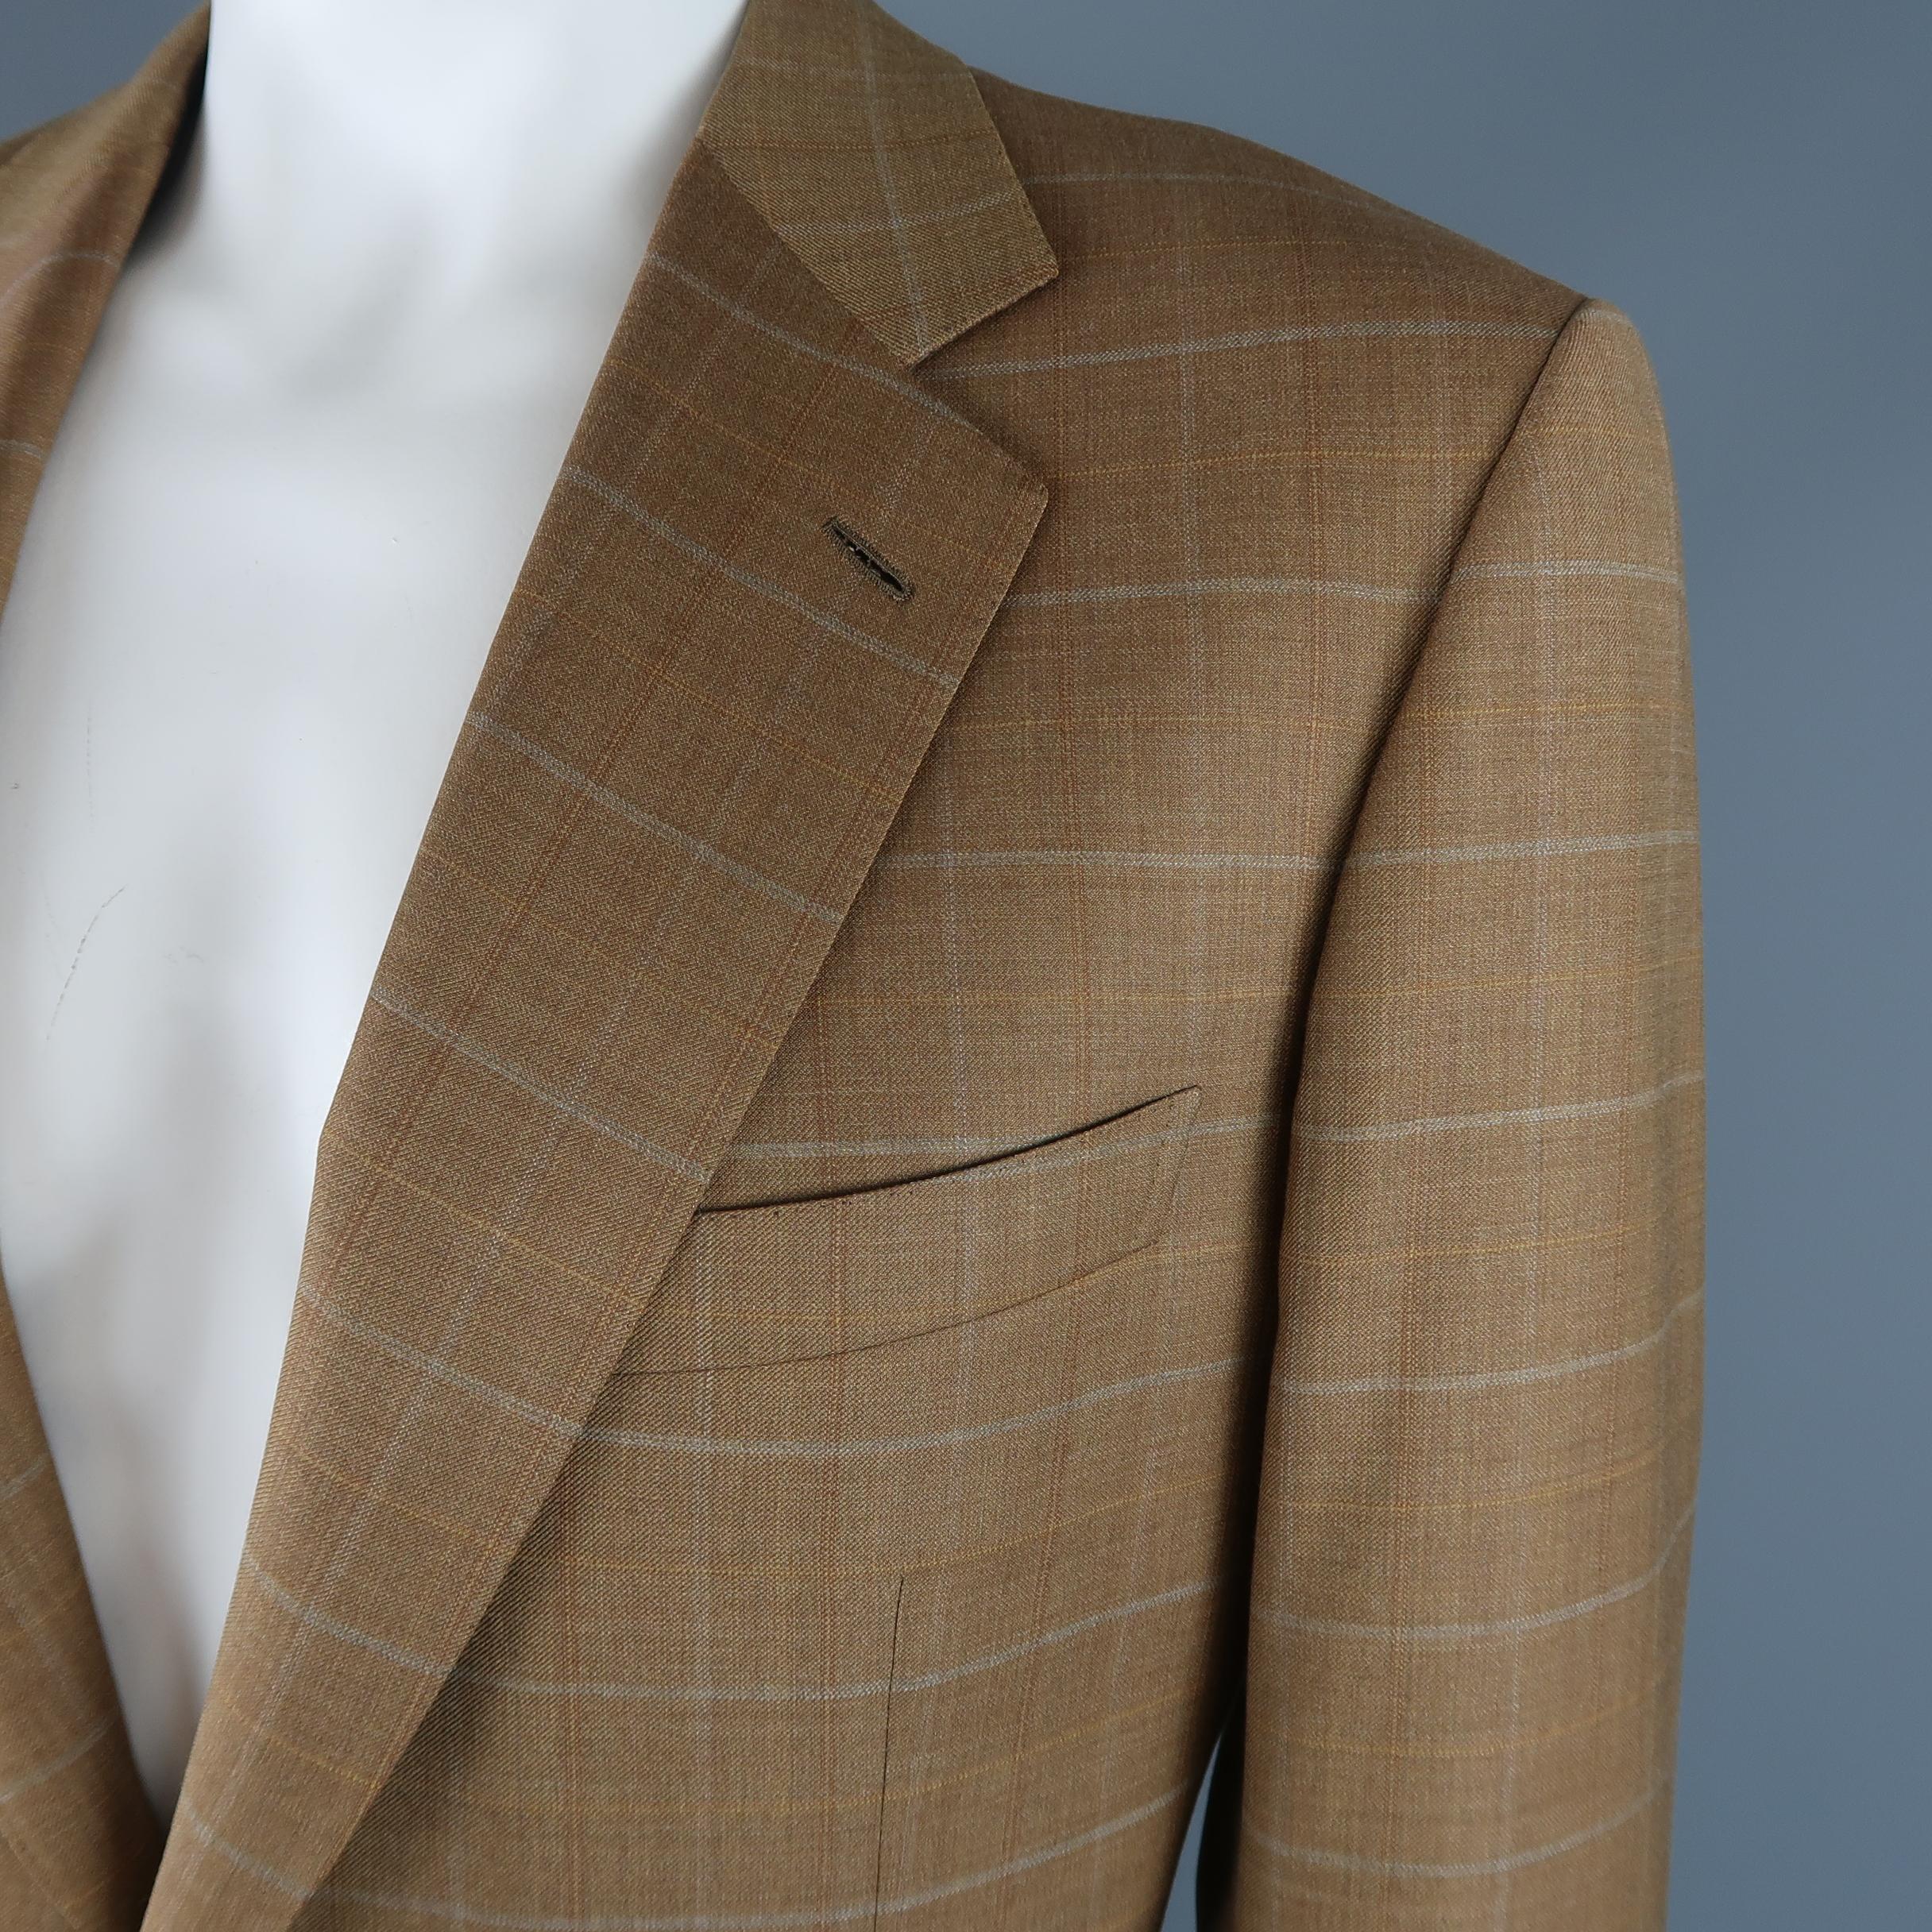 Vintage BRIONI single breasted sport coat comes in golden tan wool with all over window pane pattern and features a wide notch lapel, two button front, flap pockets, and satin liner. Made in Italy.
 
Excellent Pre-Owned Condition.
Marked: 44
